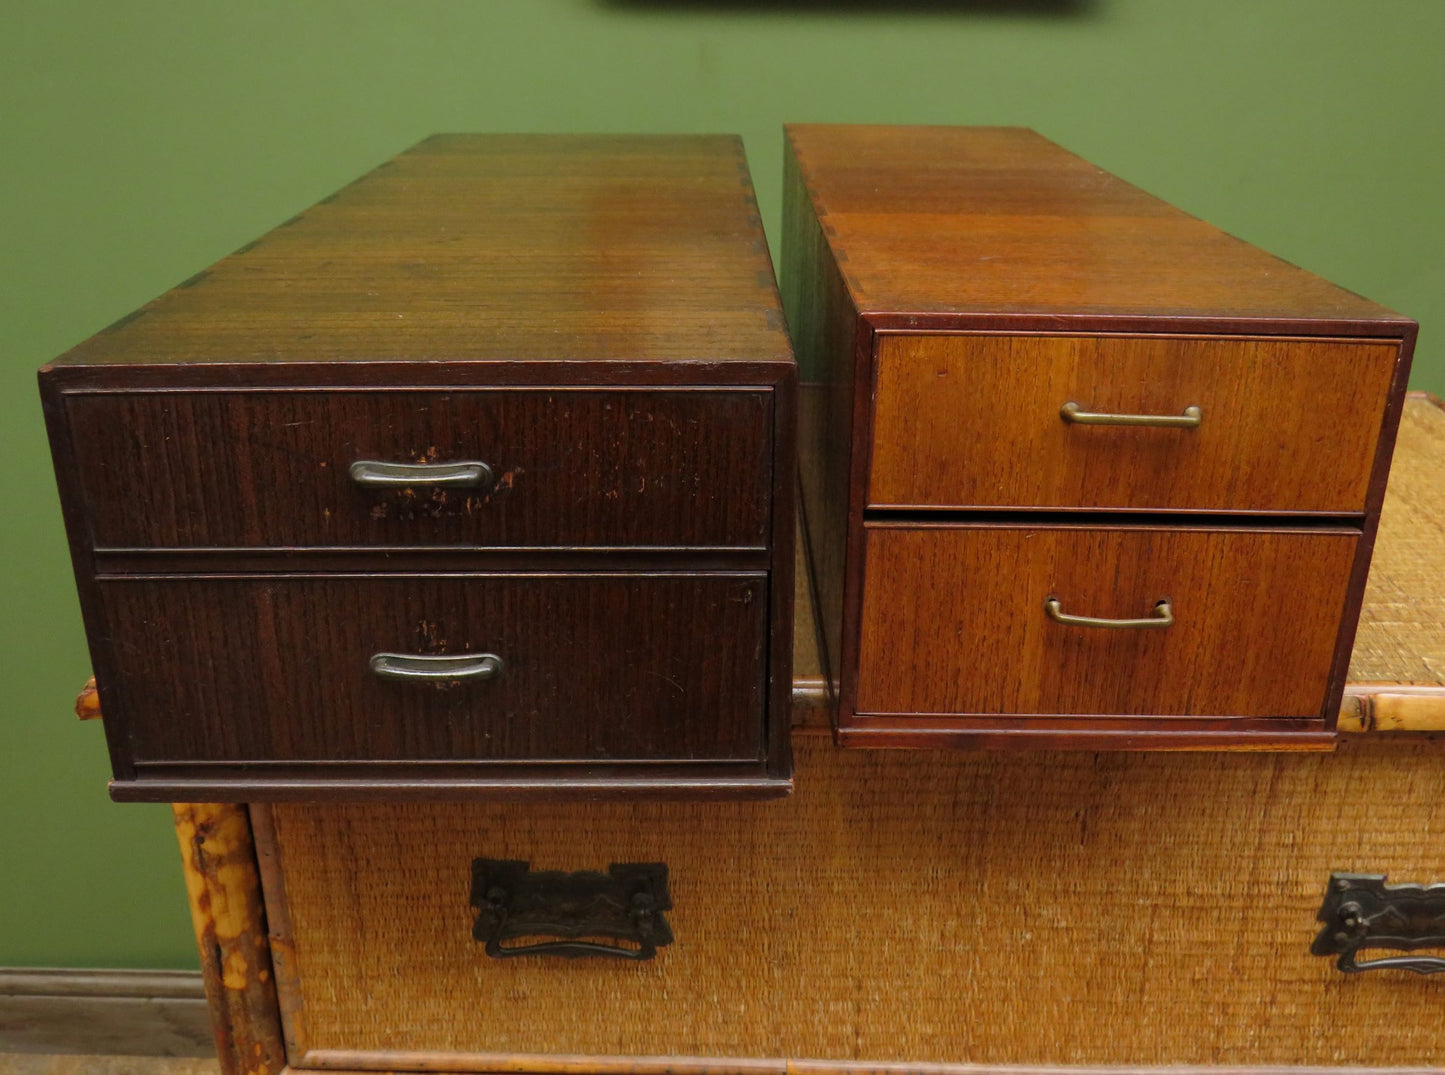 Pair of Vintage Long Wooden Storage Boxes with Lacquered Drawers